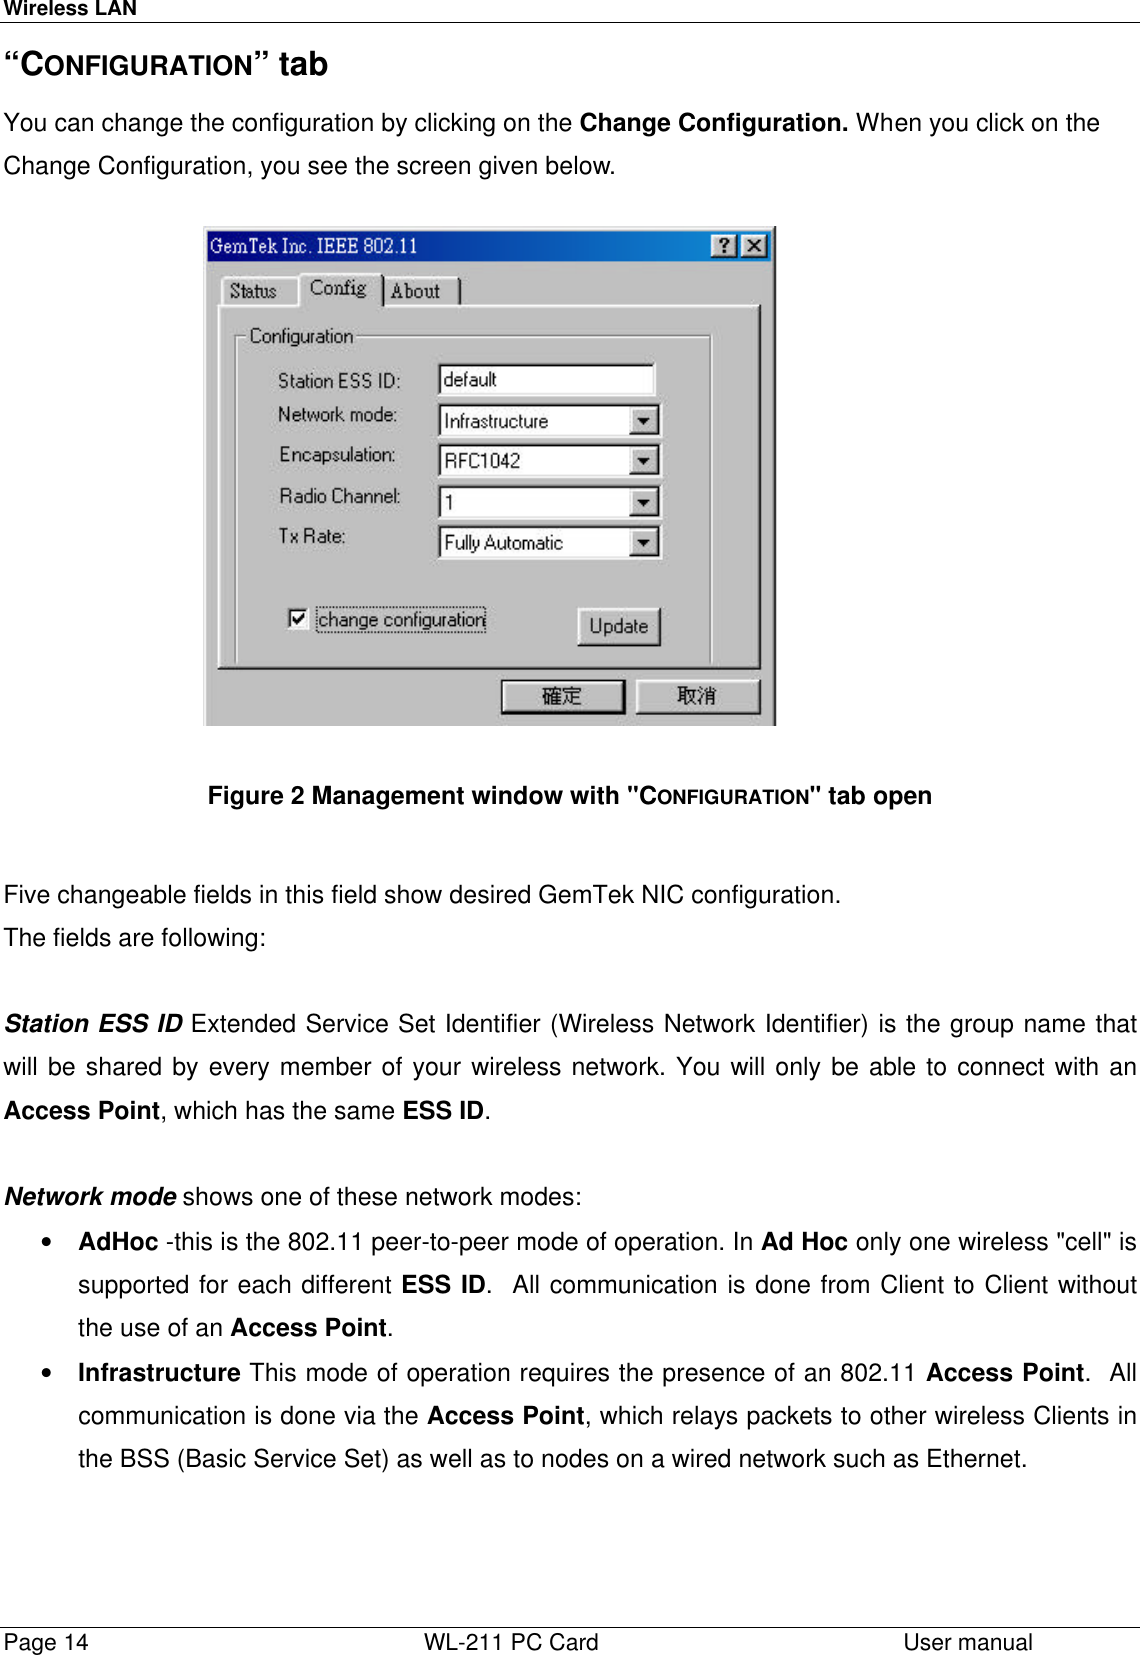 Wireless LANPage 14   WL-211 PC Card User manual “CONFIGURATION” tabYou can change the configuration by clicking on the Change Configuration. When you click on theChange Configuration, you see the screen given below. Figure 2 Management window with &quot;CONFIGURATION&quot; tab open  Five changeable fields in this field show desired GemTek NIC configuration.The fields are following: Station ESS ID Extended Service Set Identifier (Wireless Network Identifier) is the group name thatwill be shared by every member of your wireless network. You will only be able to connect with anAccess Point, which has the same ESS ID.  Network mode shows one of these network modes:• AdHoc -this is the 802.11 peer-to-peer mode of operation. In Ad Hoc only one wireless &quot;cell&quot; issupported for each different ESS ID.  All communication is done from Client to Client withoutthe use of an Access Point.• Infrastructure This mode of operation requires the presence of an 802.11 Access Point.  Allcommunication is done via the Access Point, which relays packets to other wireless Clients inthe BSS (Basic Service Set) as well as to nodes on a wired network such as Ethernet. 